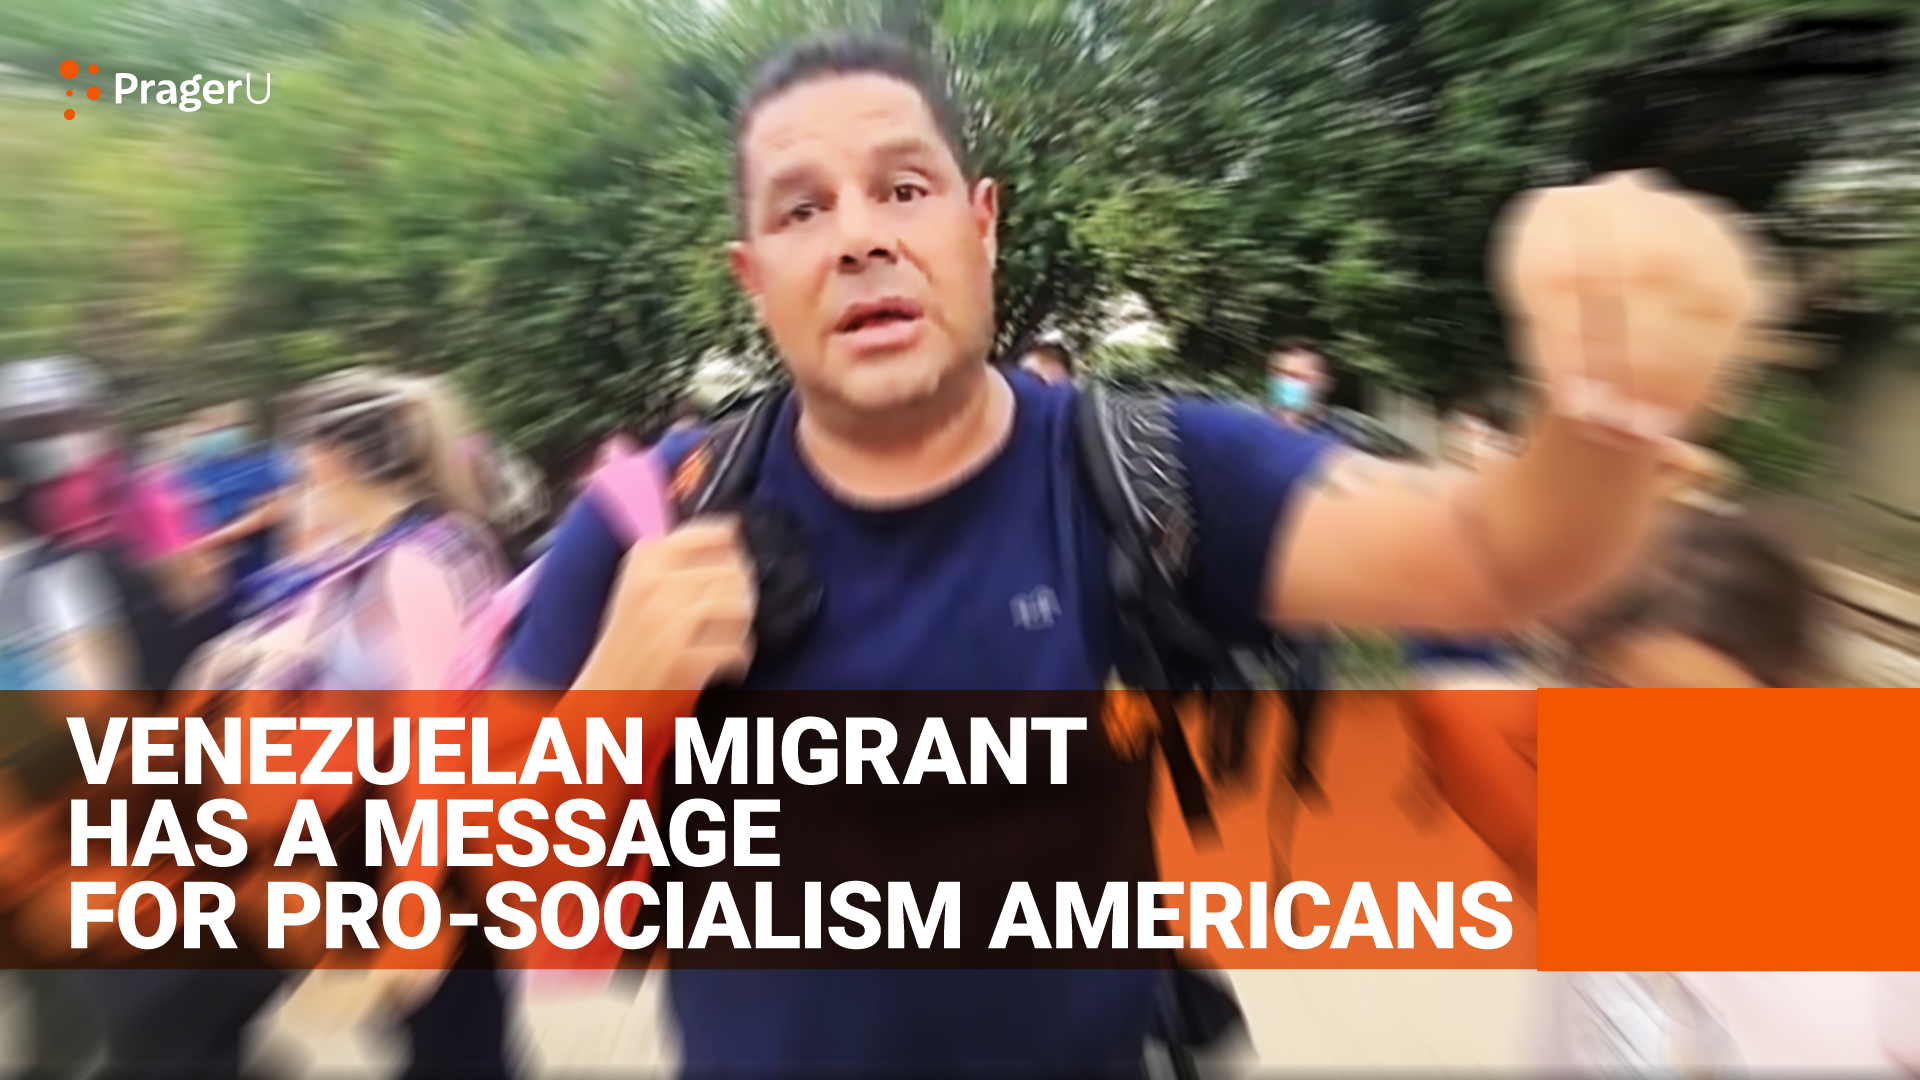 Venezuelan Migrant to American Socialists: Go to a Socialist Country and See It for Yourselves